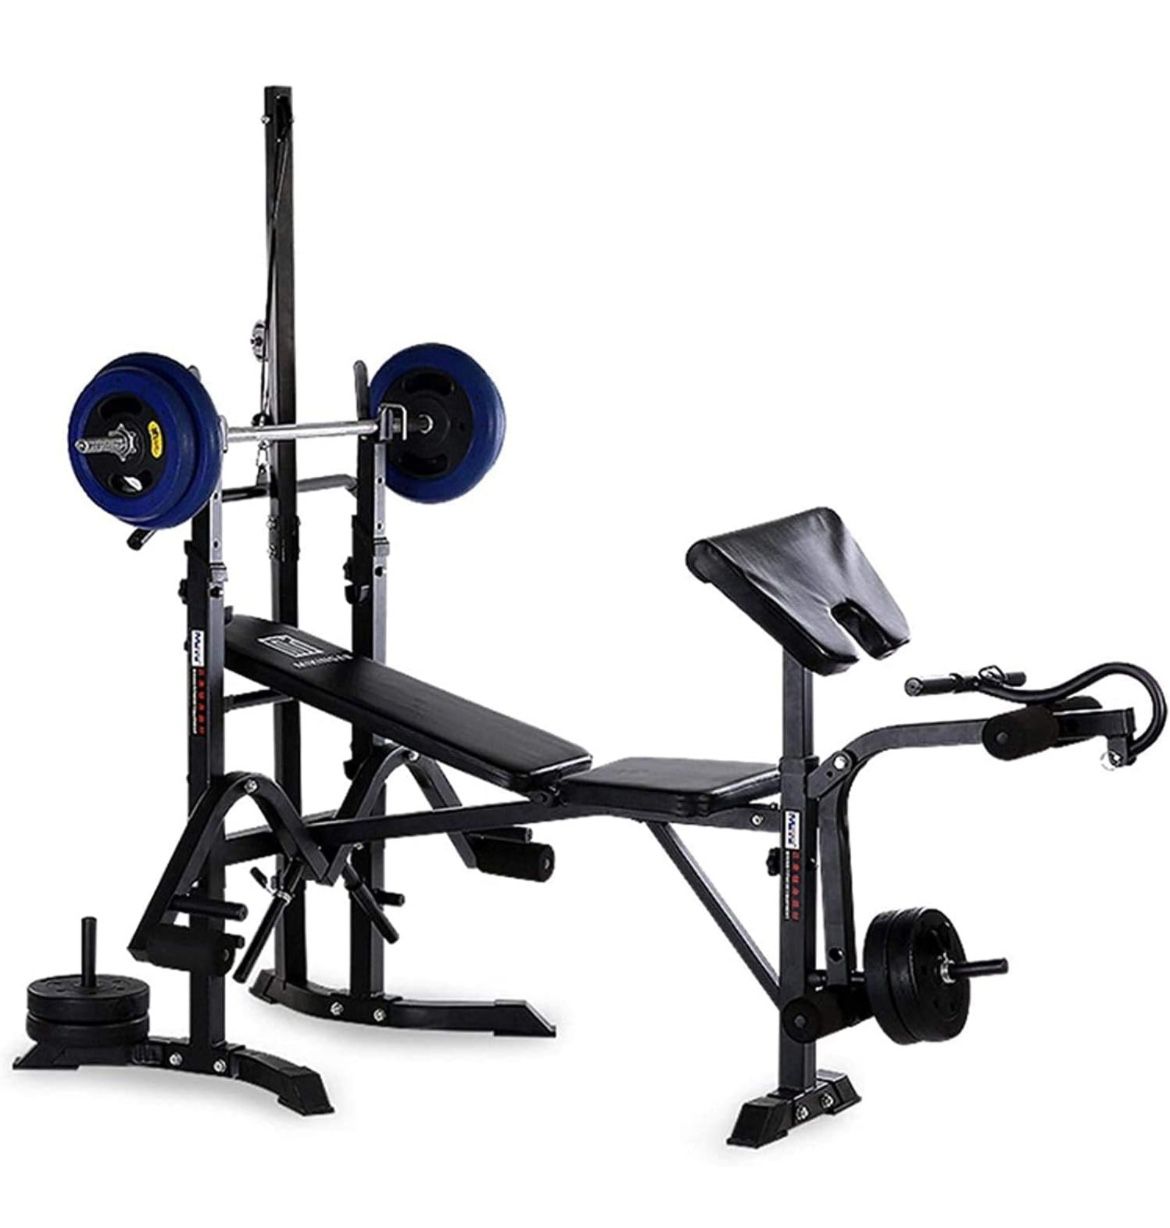 Fitness Equipment Multifunctional dumbbell bench folding Weight Benches Equipment for Home Gym Multifunctional Olympic Weight-Lifting Bed Machine Fitn